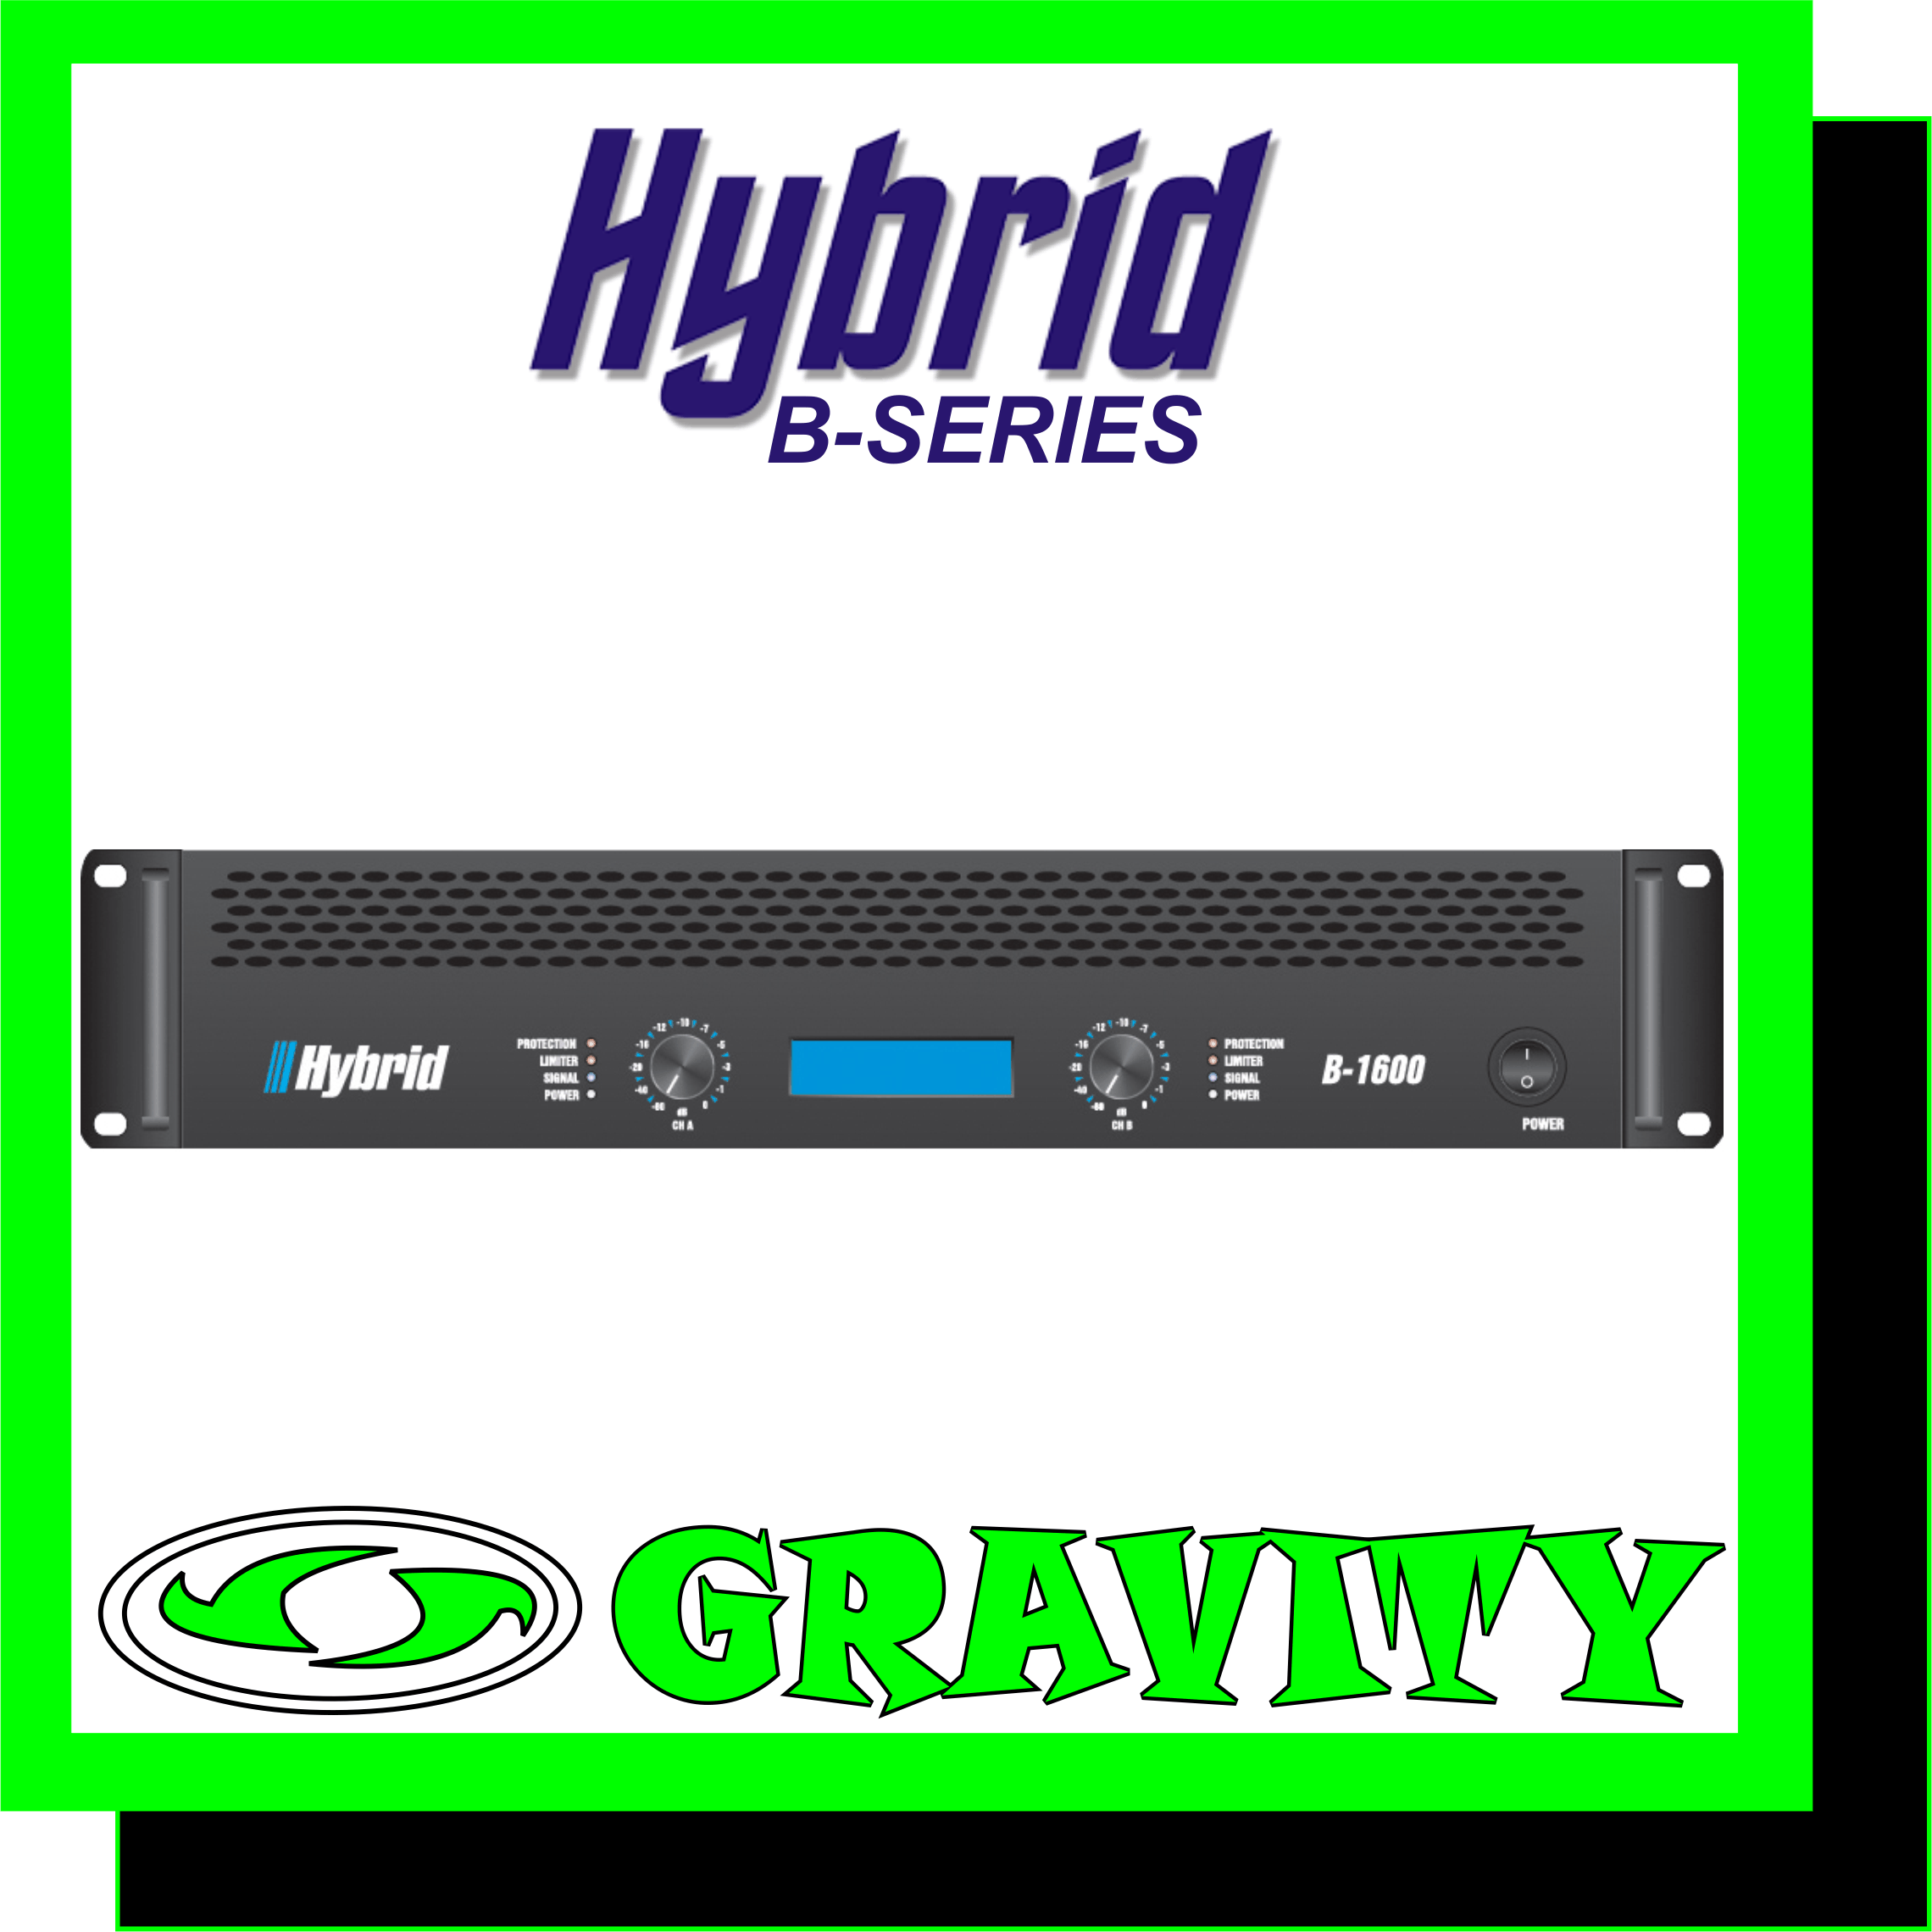 Hybrid B1600MK5 2X800W Power Amplifier  8Ohm Stereo Power . RMS/CH 485W 4Ohm Stereo Power . RMS/CH 715W 8Ohm Bridged Mono Power . RMS 1430W  Frequency Response ( 1W/8O) 20Hz 20KHz +/- 3dB Protection DC Protection . Short Circuit Protection . Thermal Protection . Inrush Current Protection . Soft Start Portection . Input and Overload Protection THD+N (20Hz-20KHz) <0.1% Damping Factor (1KHz @ 8O) >300 Hum and Noise(A weighted . -80dBW) 95dB Input Impedance (Balanced / Unbalanced) 20K Ohm / 10K Ohm Crosstalk (20Hz-20KHz Rated Power 8O) >60dB Cooling 2 x Fans . Dual speed . Front to Rear Airflow  Input Connectors Jack/Female XLR Neutrik Combo + Male XLR Neutrik Output Connectors 3x Neutrik Speakon Dimensions (WxHxD) mm 483 x 88 x 430 Weight Kg 18.5